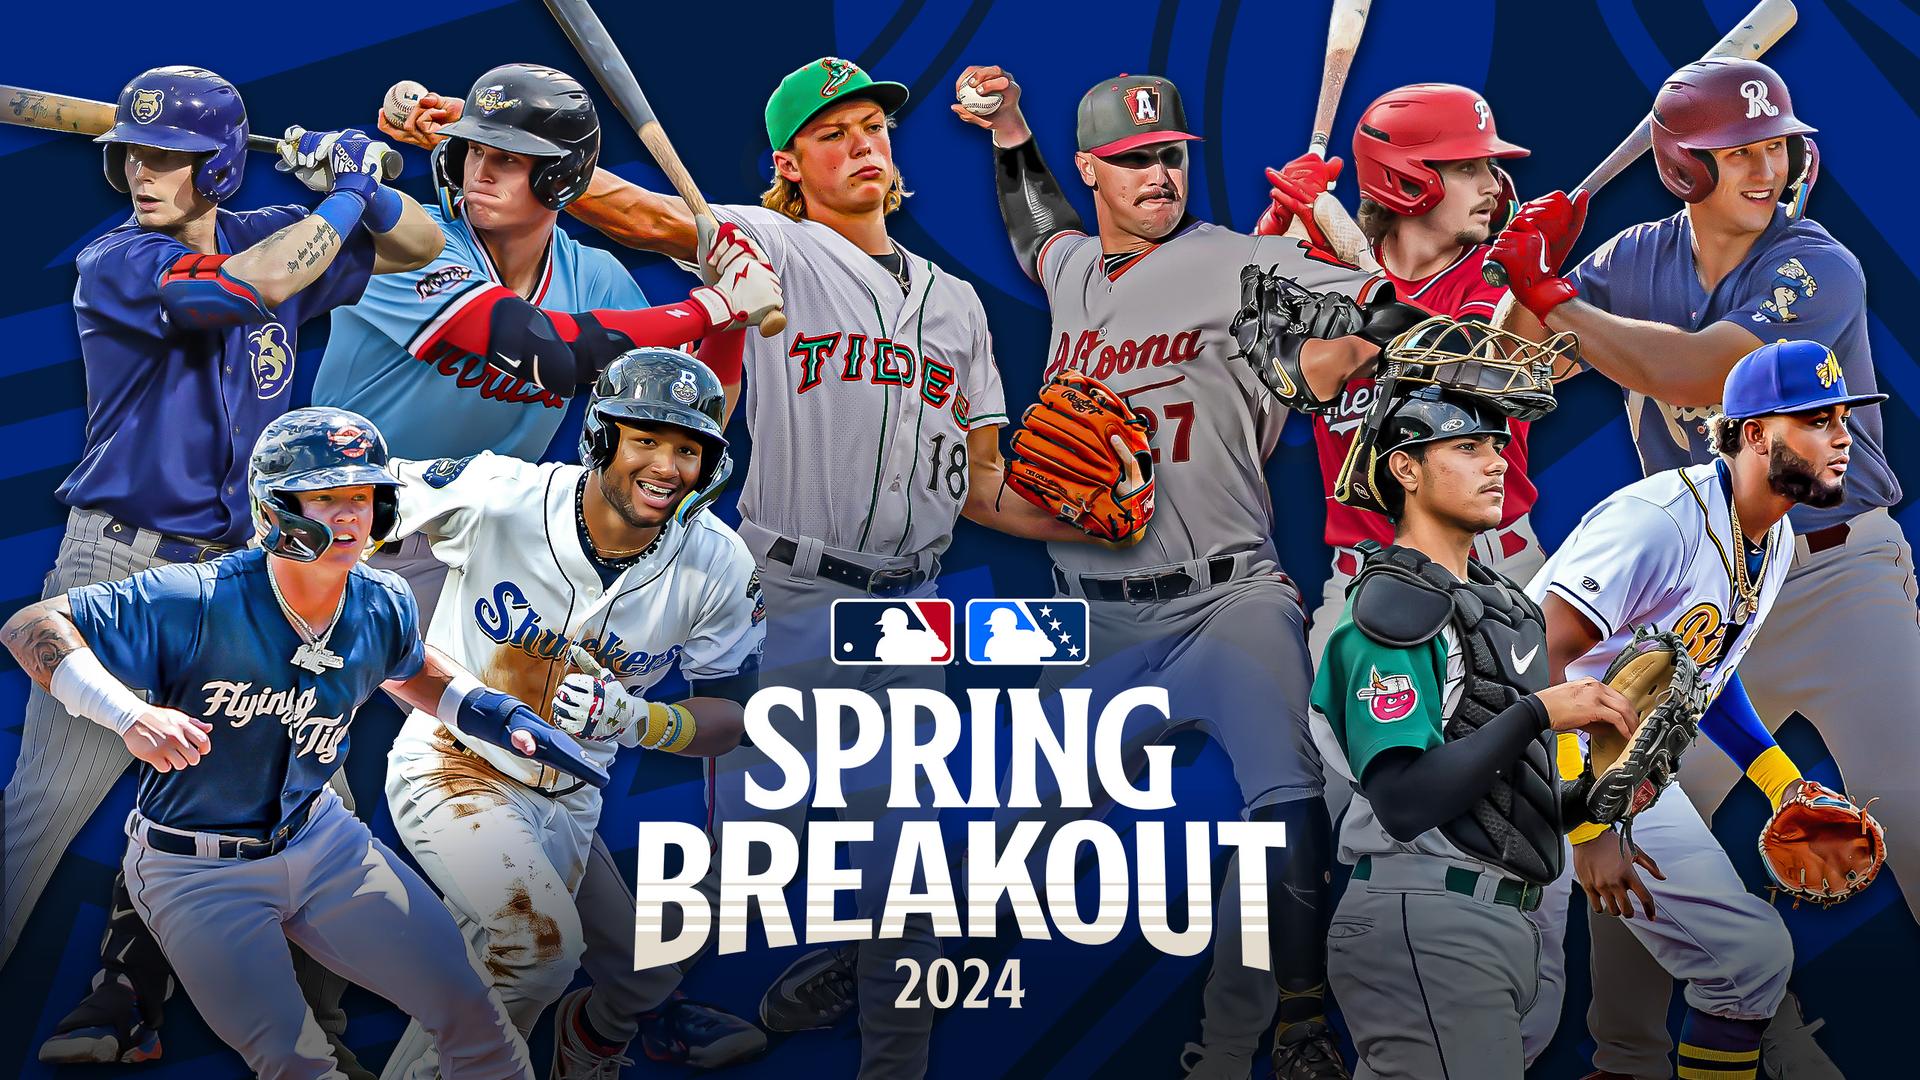 Spring Breakout 2024